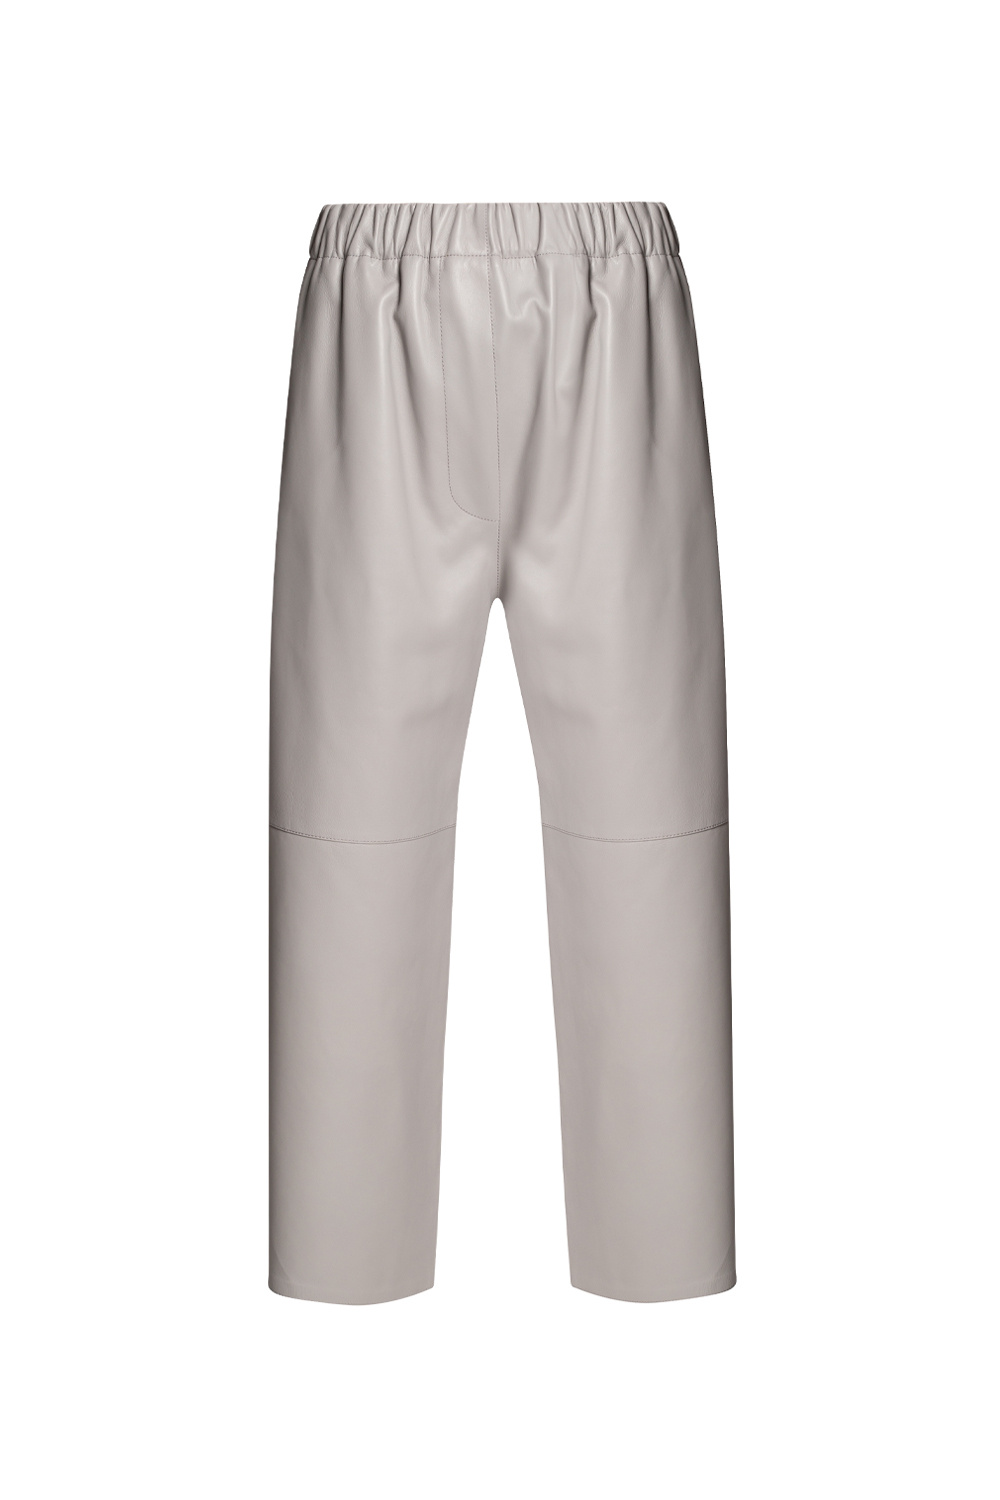 Loewe Leather Givenchy trousers